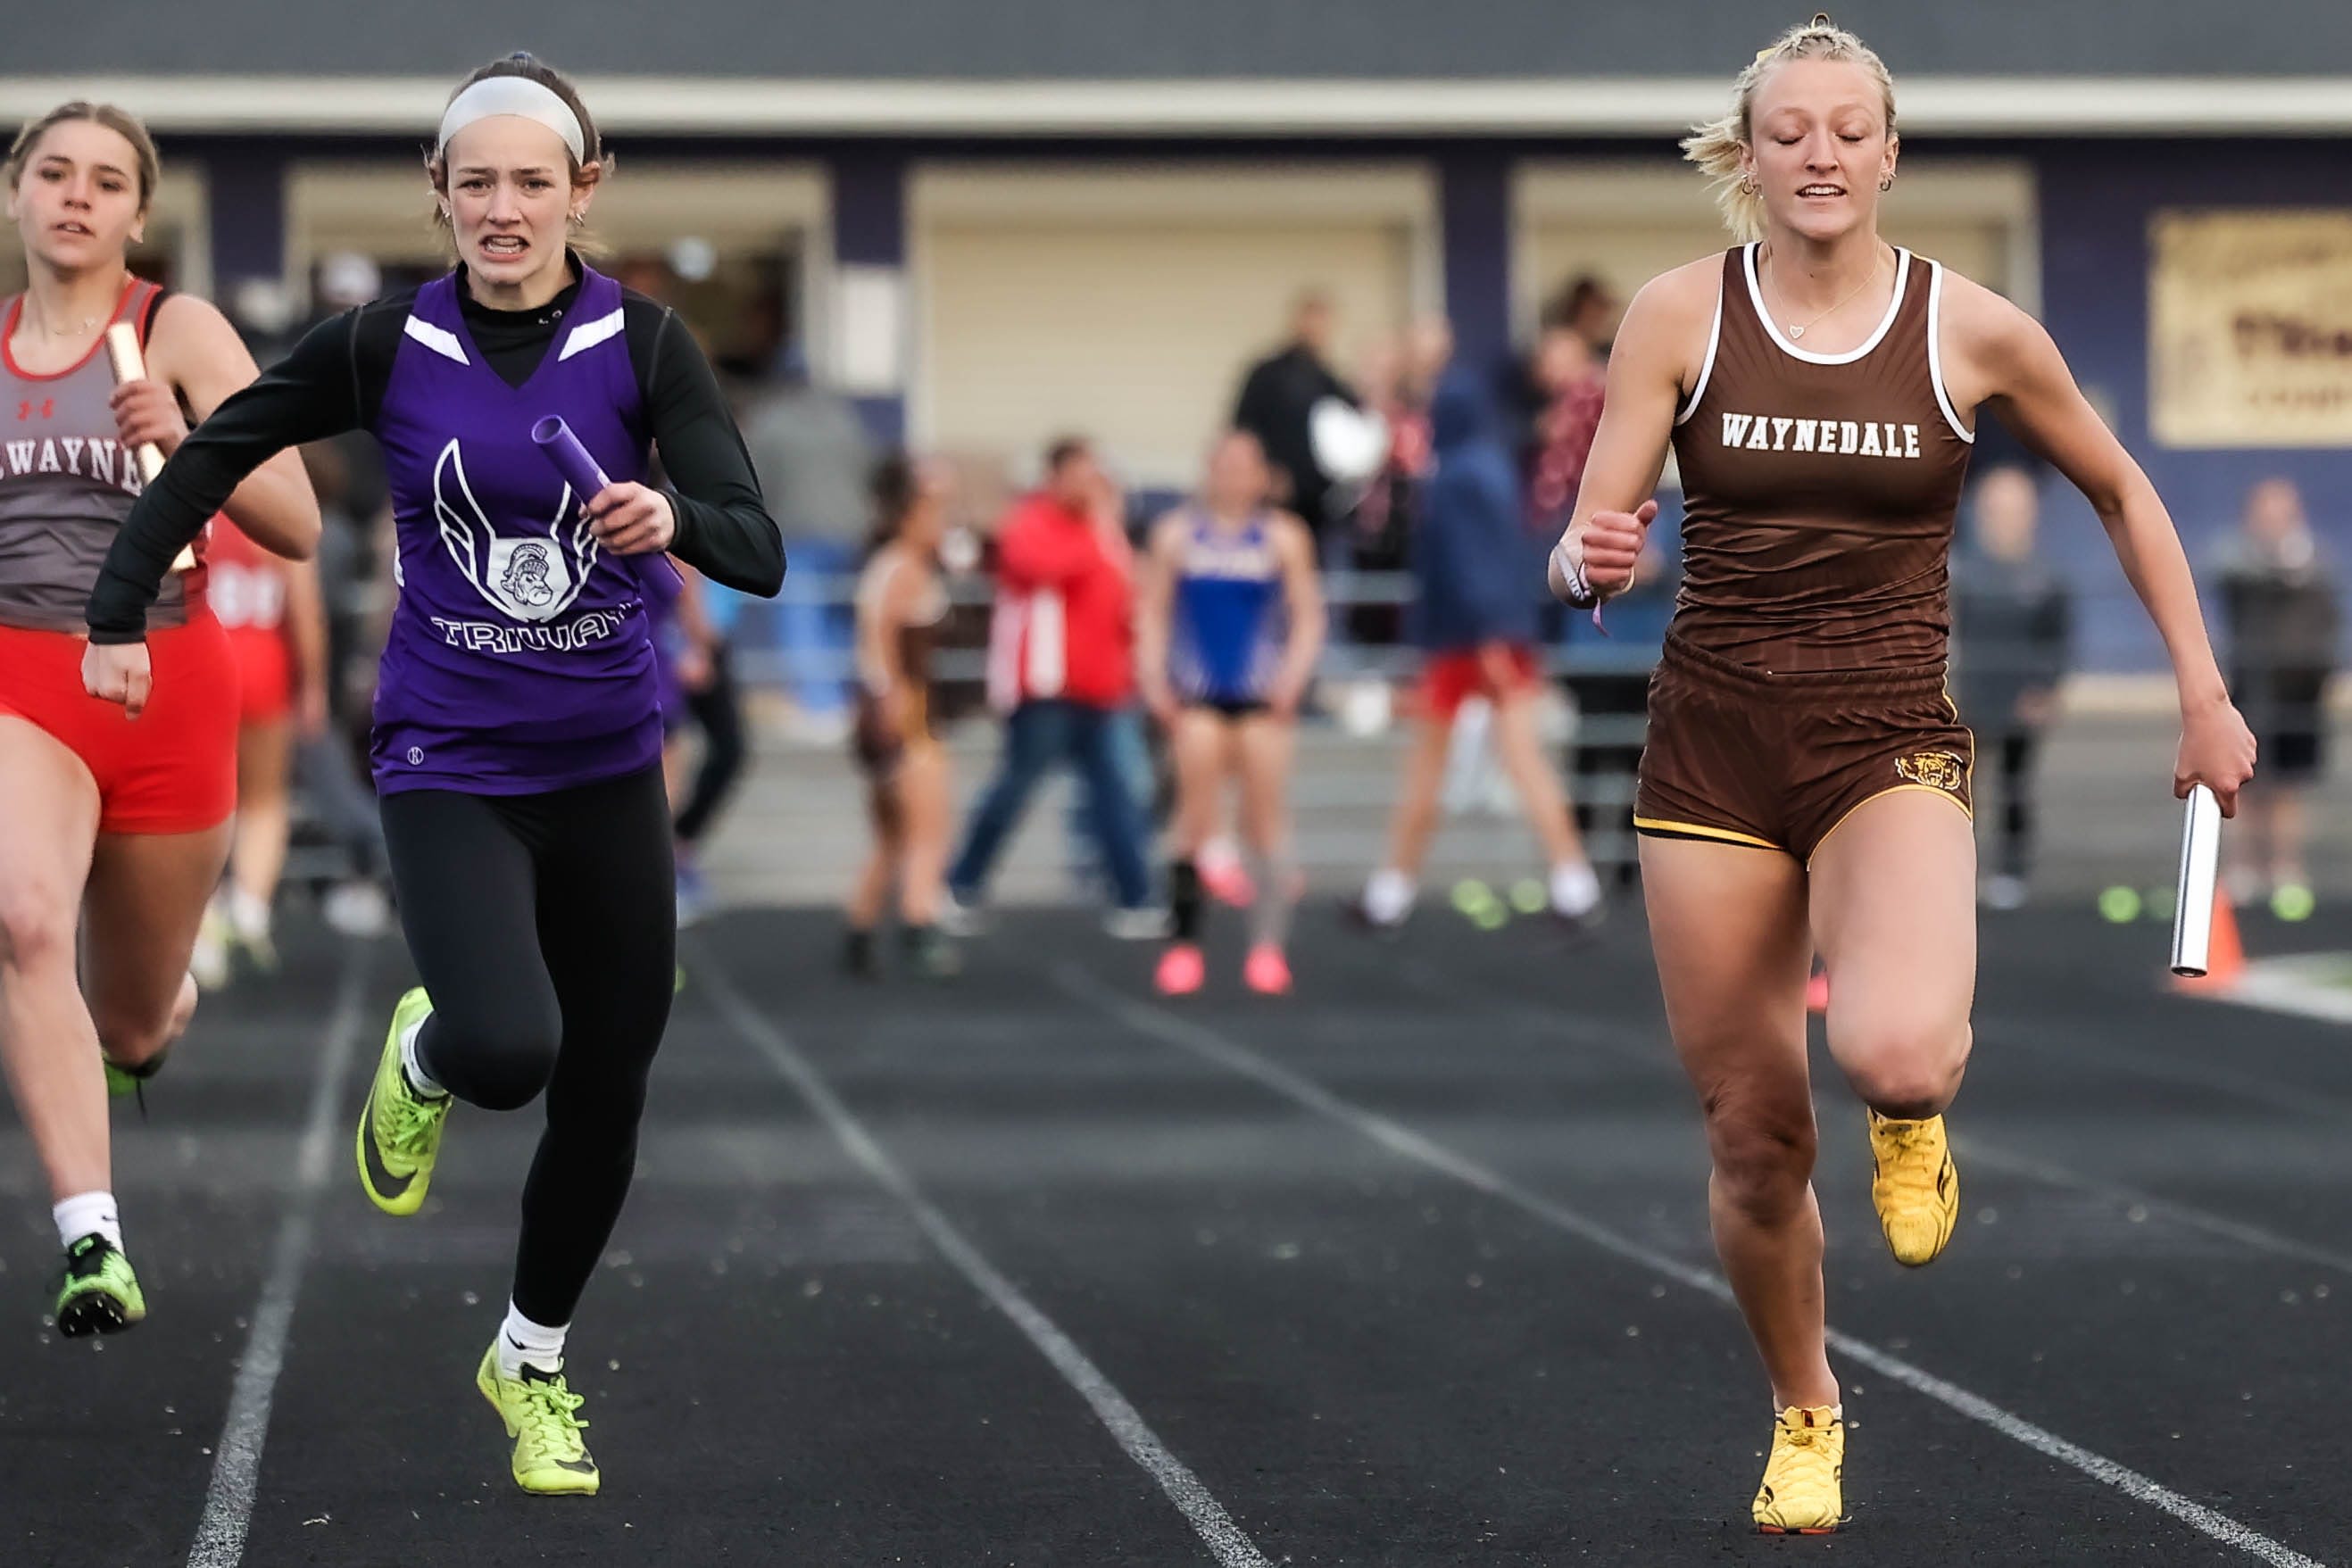 District track preview: Waynedale sprinters looking forward to postseason challenge